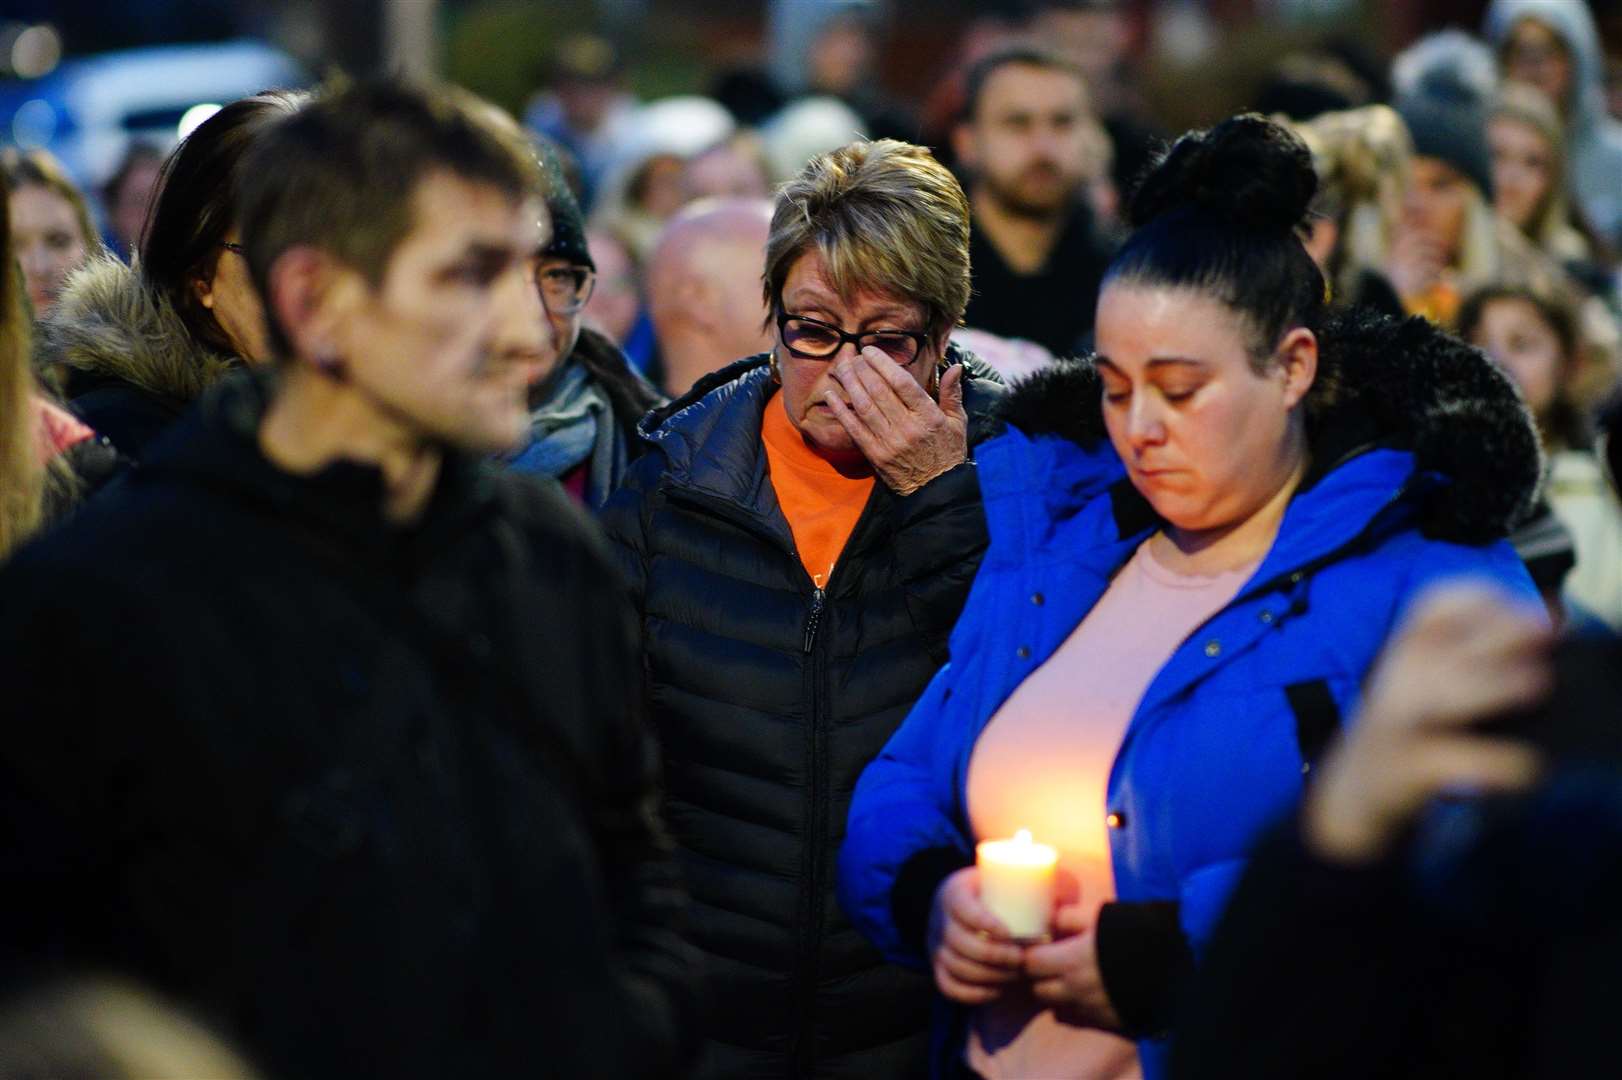 People were visibly upset at the vigil in south Bristol (Ben Birchall/PA)